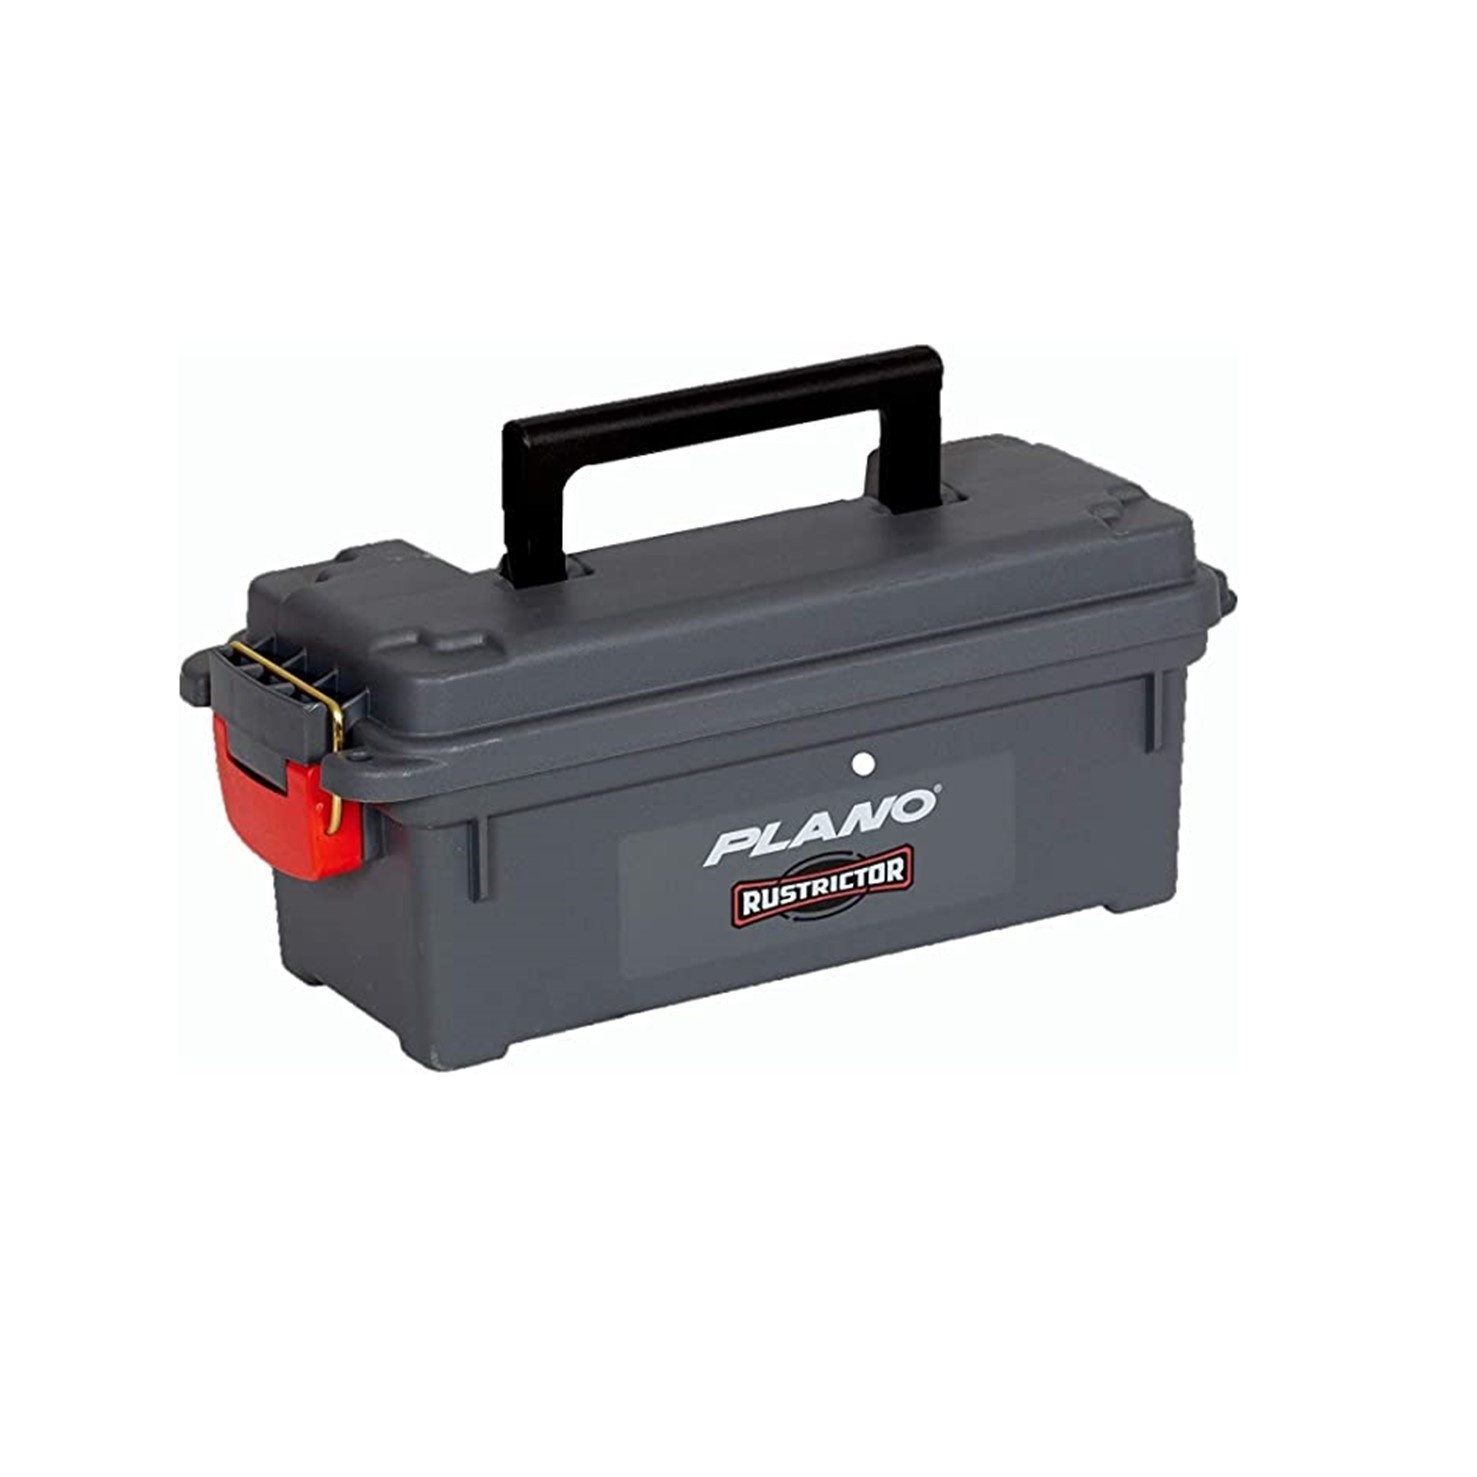 Plano Rustrictor Field/Ammo Box - Cache Tactical Supply